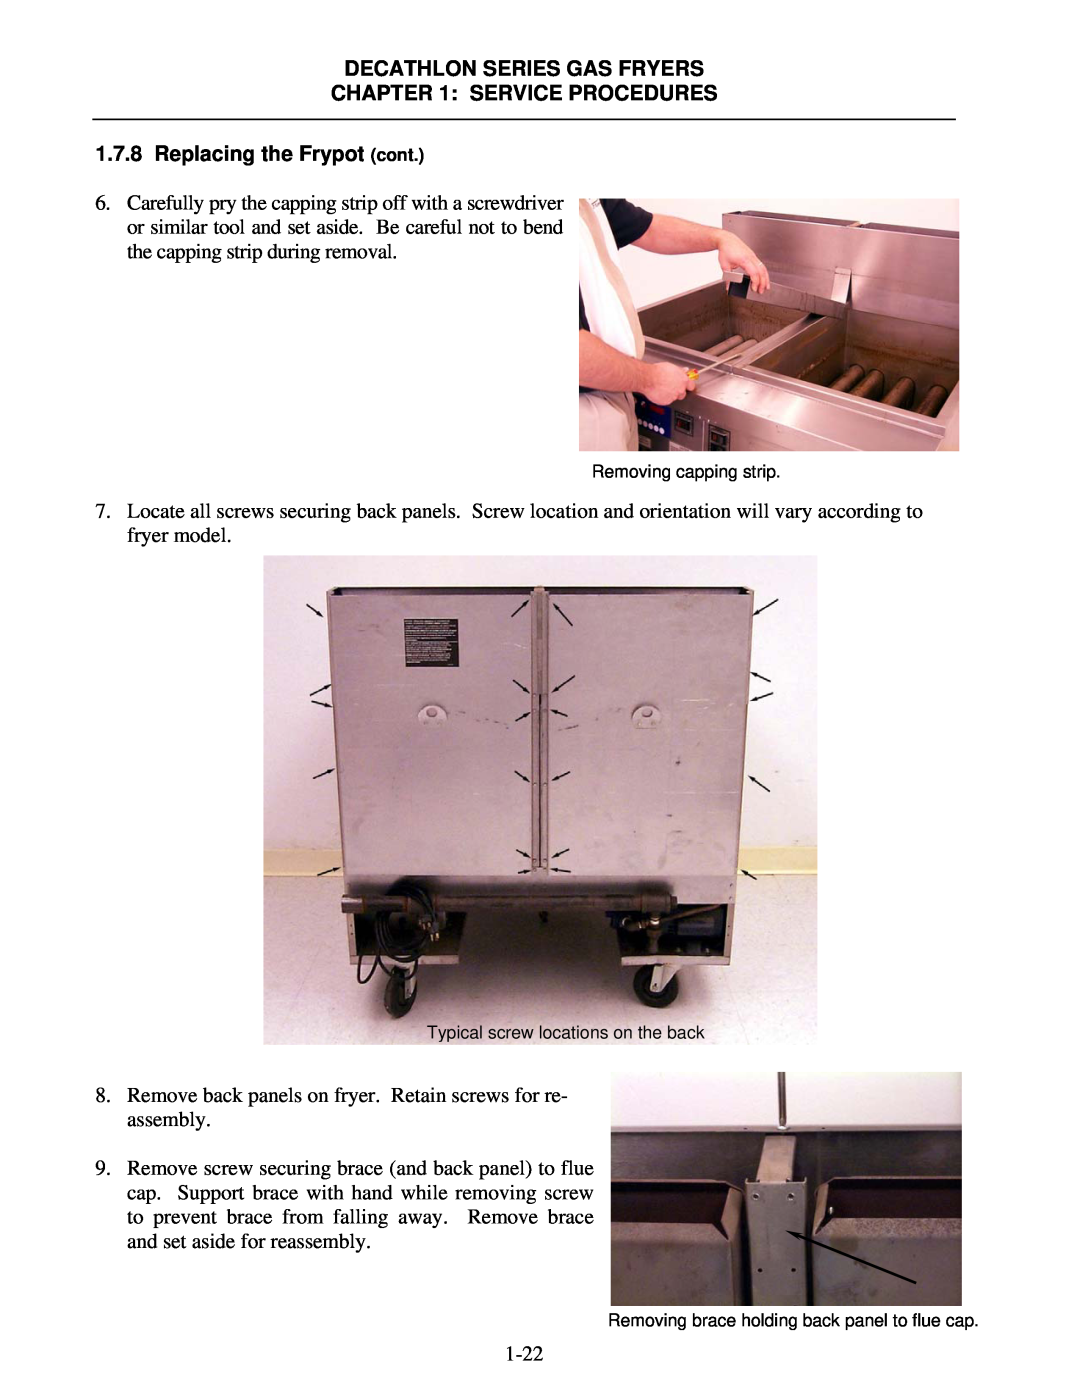 Frymaster FPD, SCFD manual Replacing the Frypot cont, Decathlon Series Gas Fryers, Service Procedures 